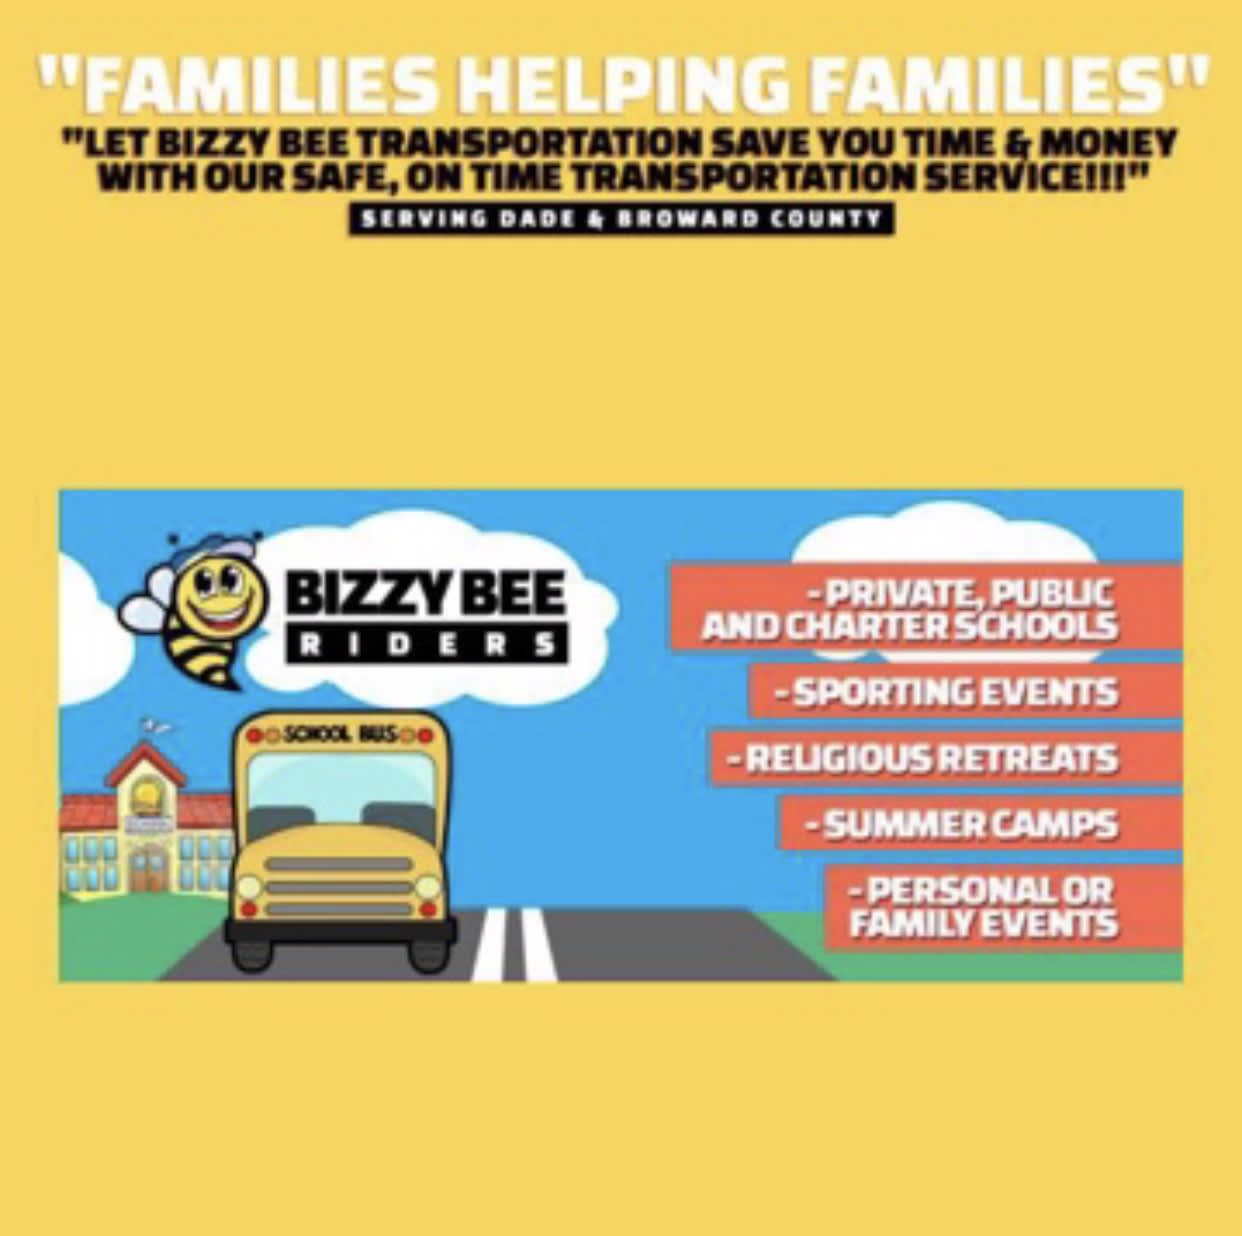 Bizzy Bee Riders Transportation and Camp Super Stars